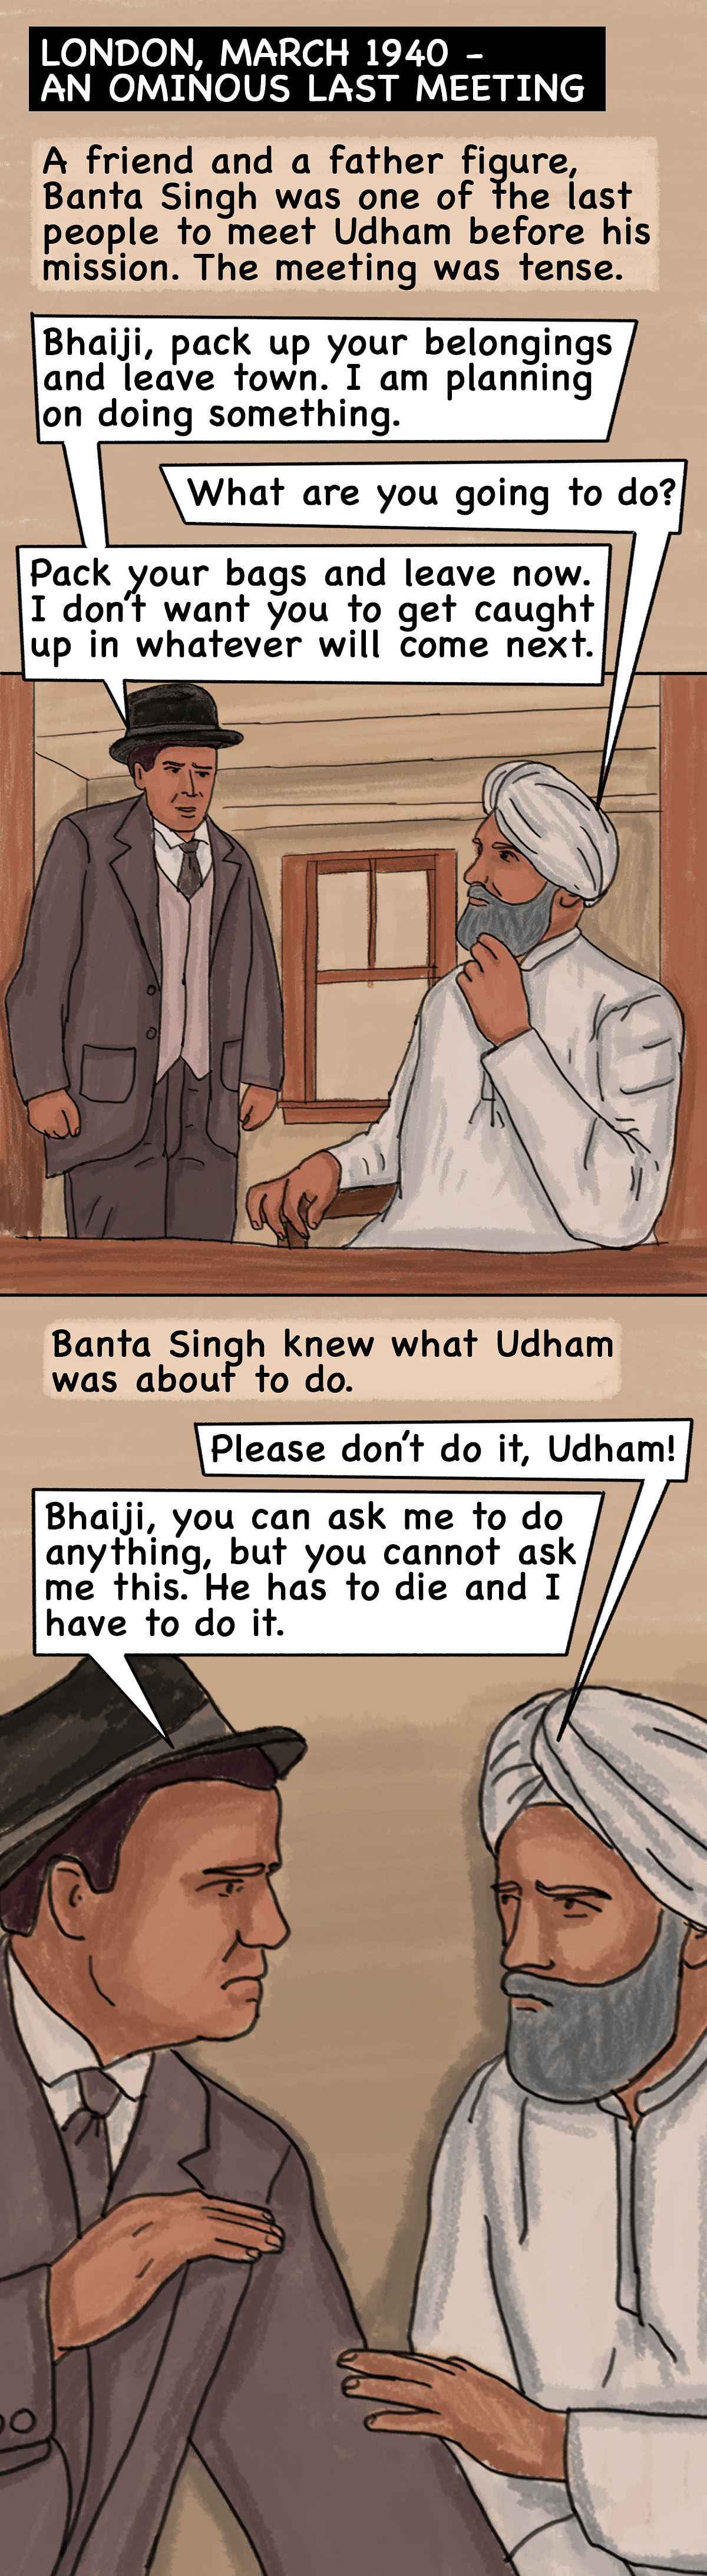 A graphic novel reliving how Udham Singh assassinated a British official 21 years after the Amritsar massacre.